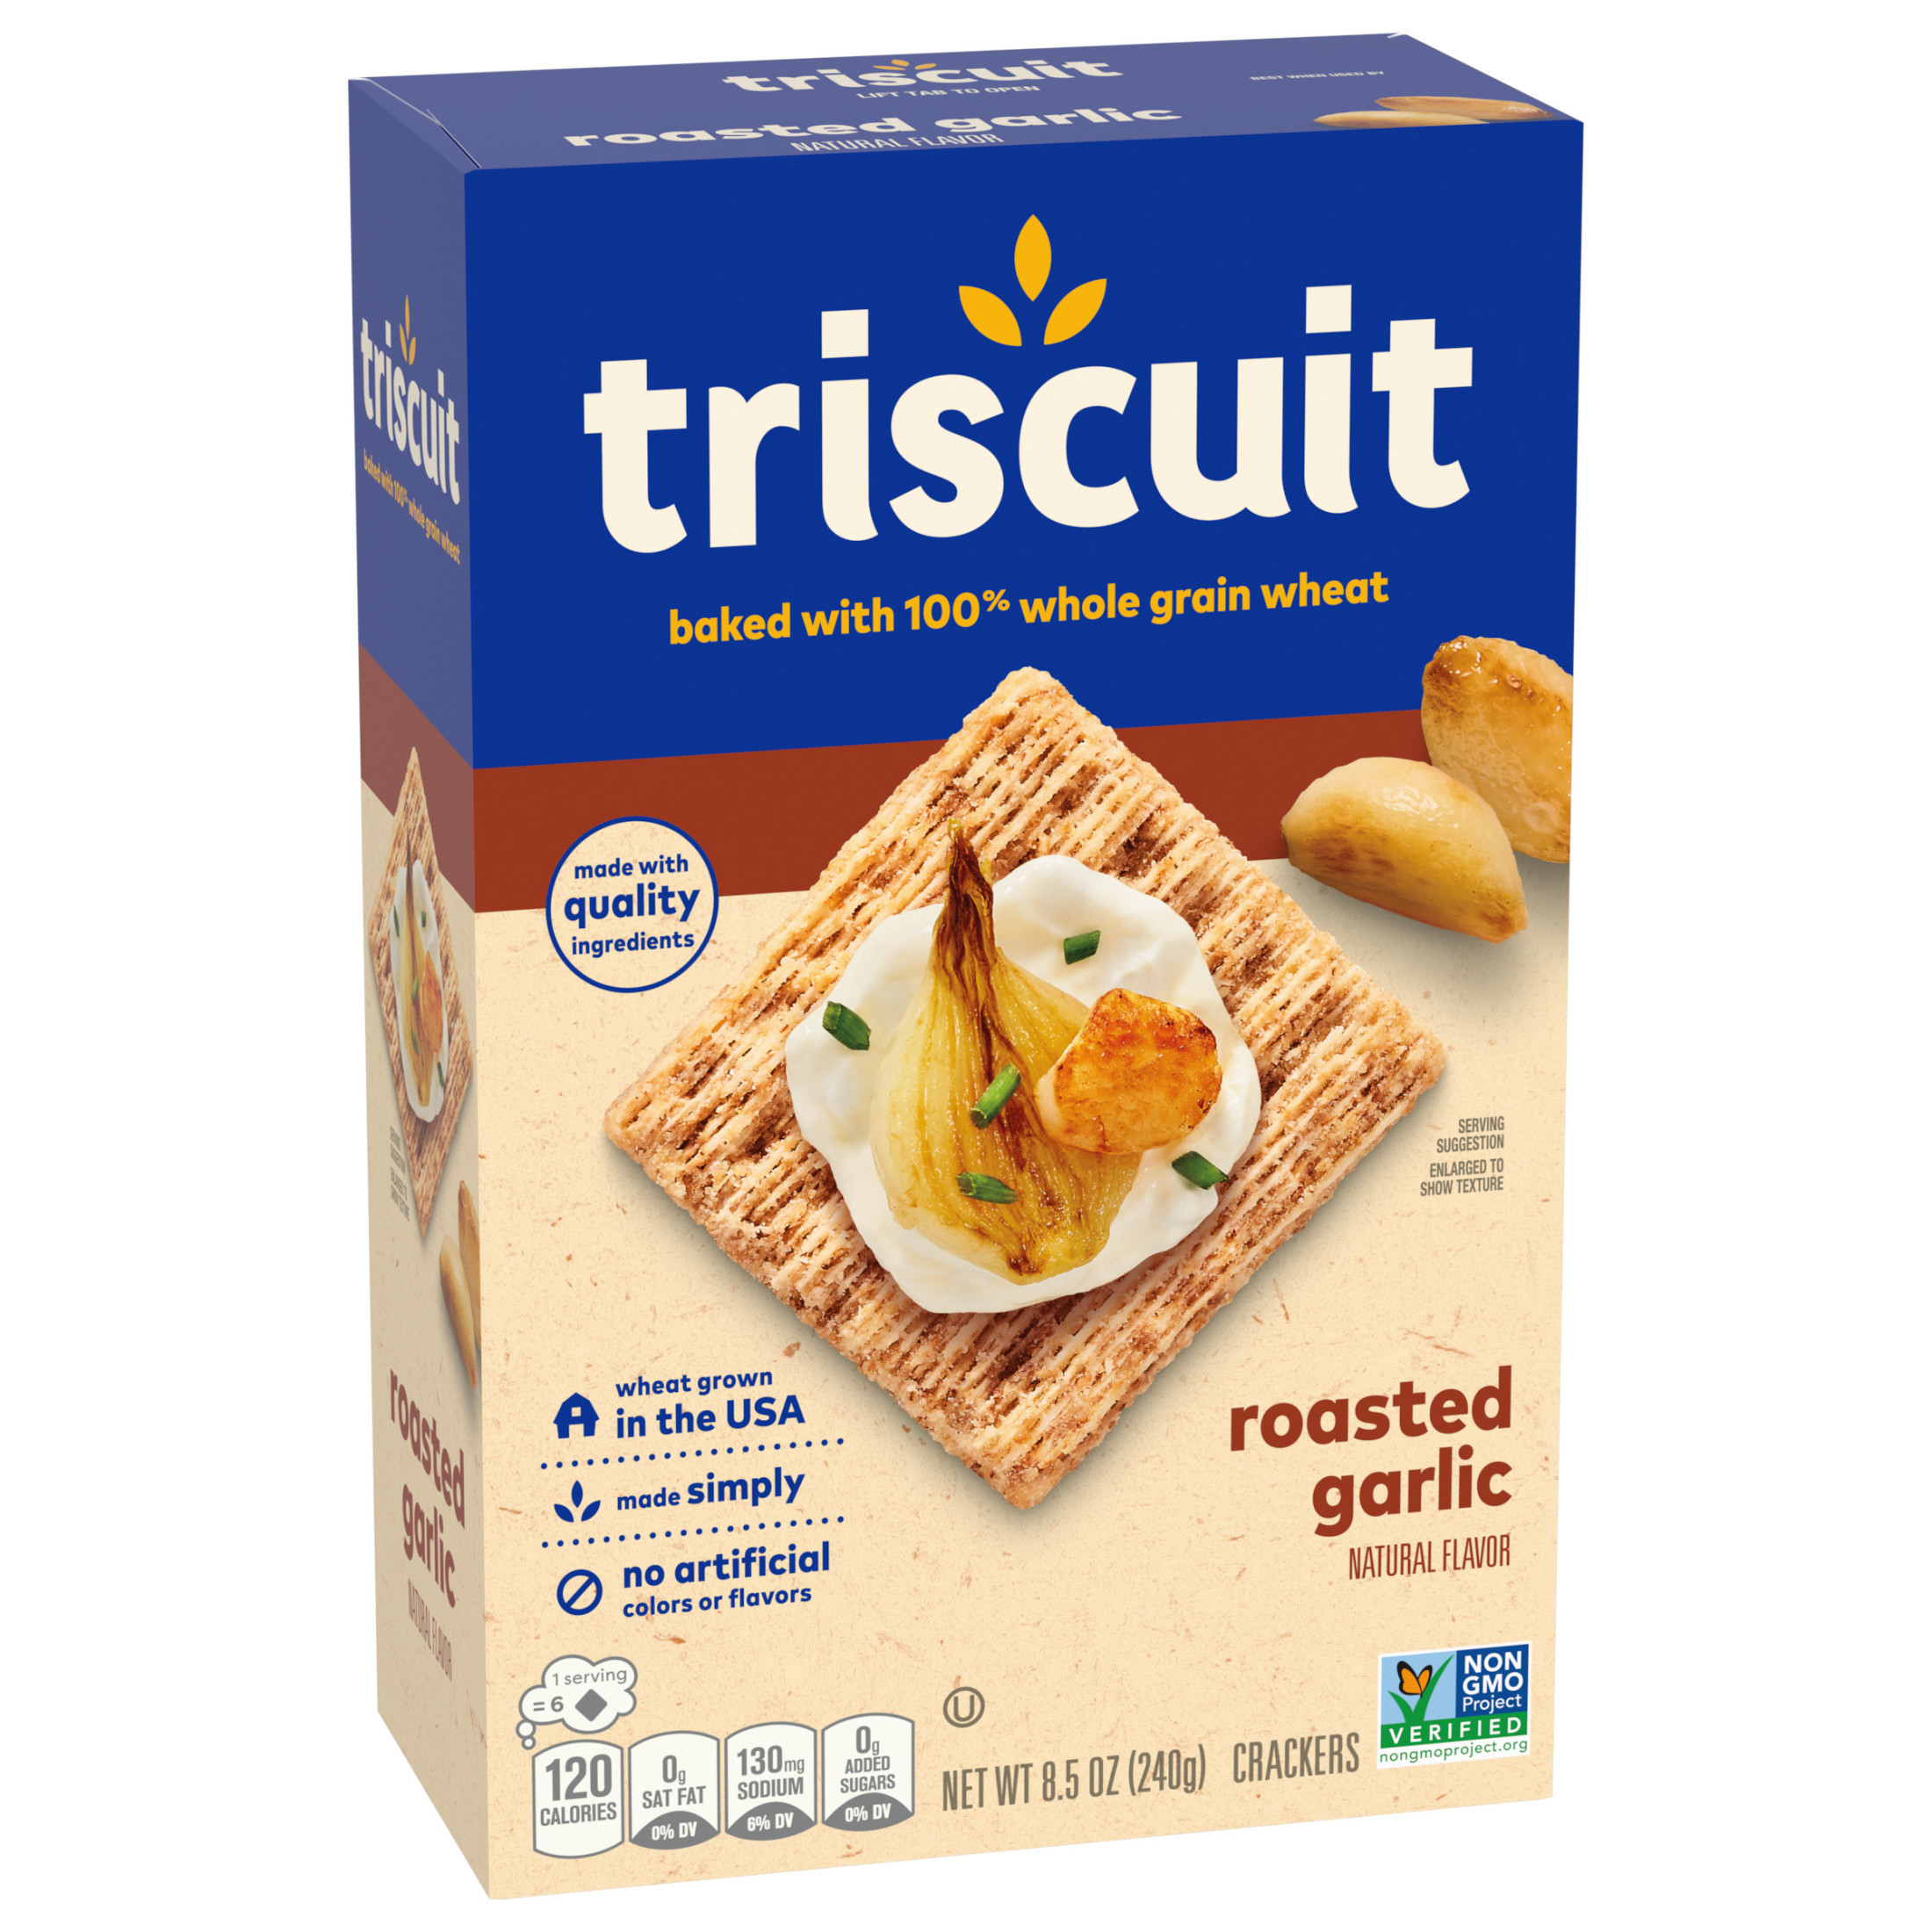 Triscuit Roasted Garlic Whole Grain Wheat Crackers, 8.5 oz - image 4 of 18